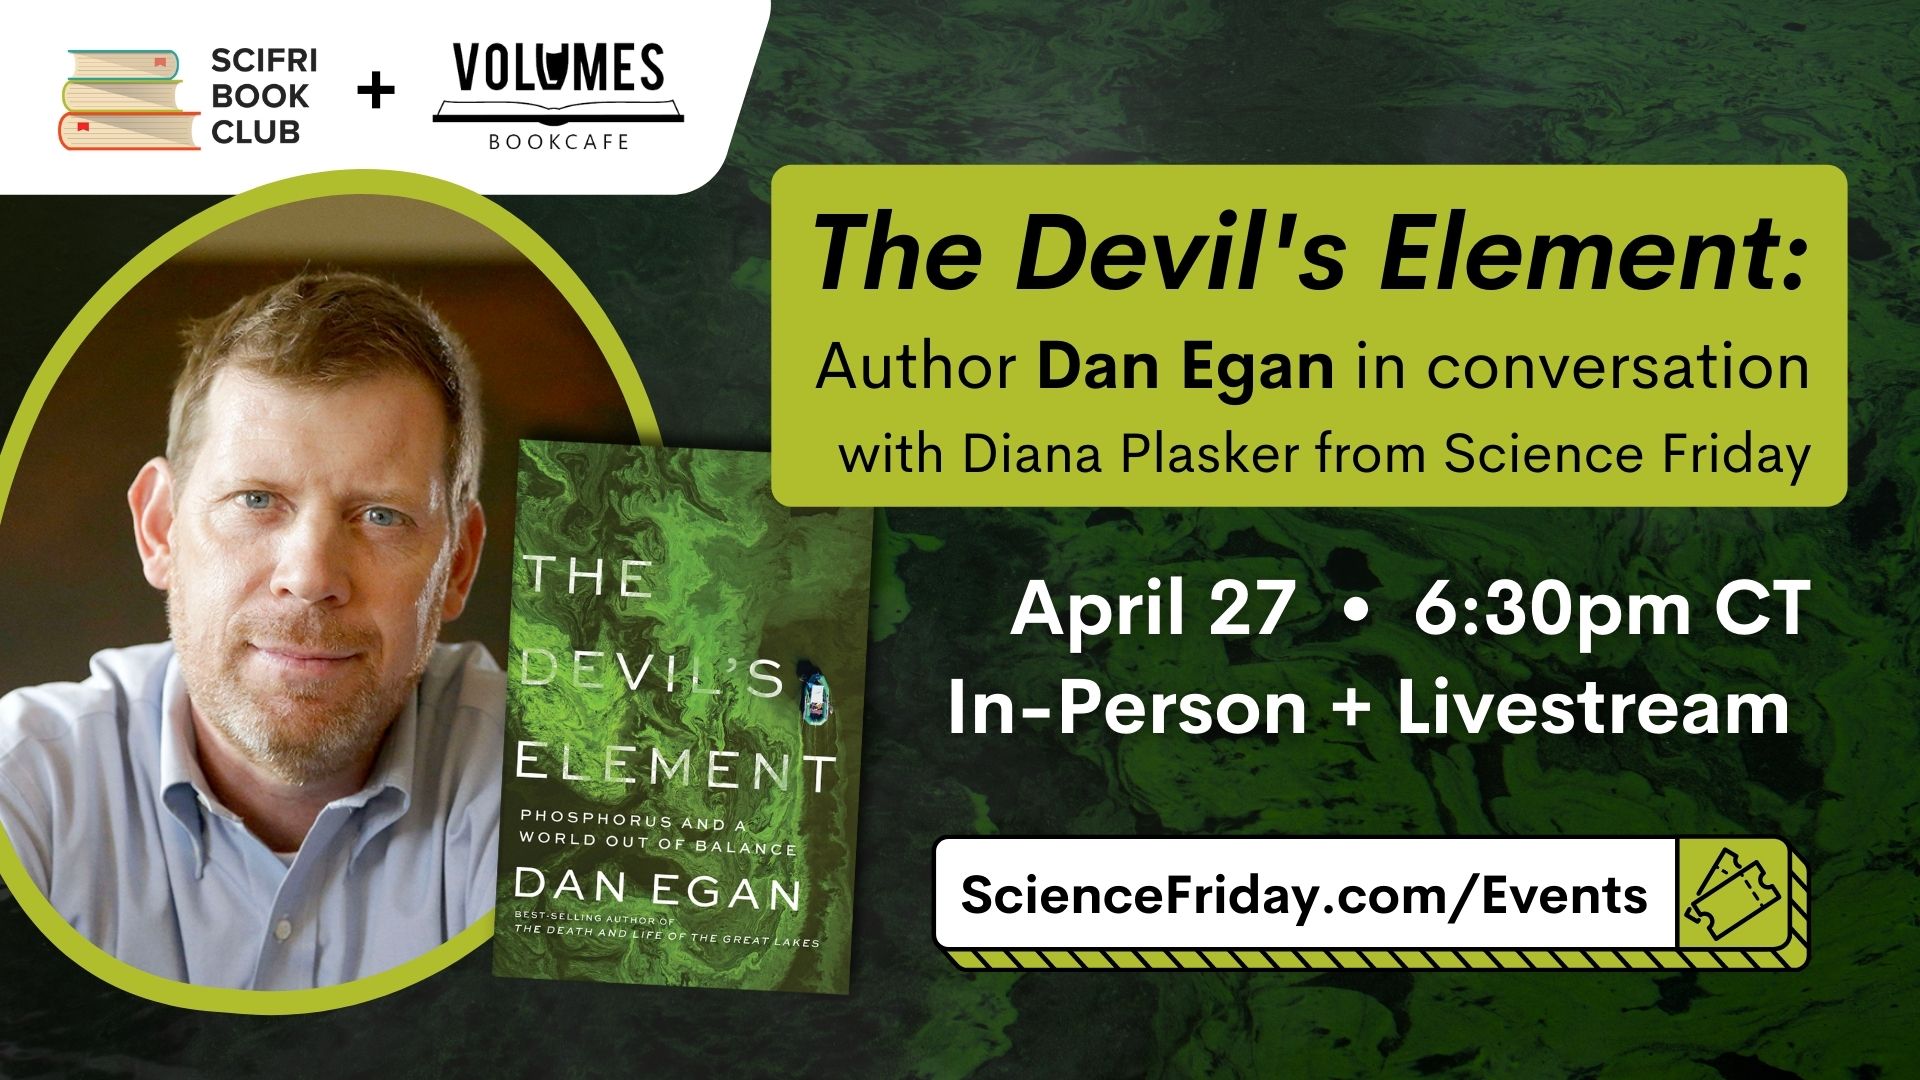 Event promotional image. In top left corner, SciFri Book Club logo, with event info below: The Devil's Element: Author Dan Egan in conversation with Diana Plasker from Science Friday. April 27, 6:30pm CT, In-Person + Livestream. To the left of the frame is a picture of THE DEVIL'S ELEMENT book cover and a headshot of author Dan Egan